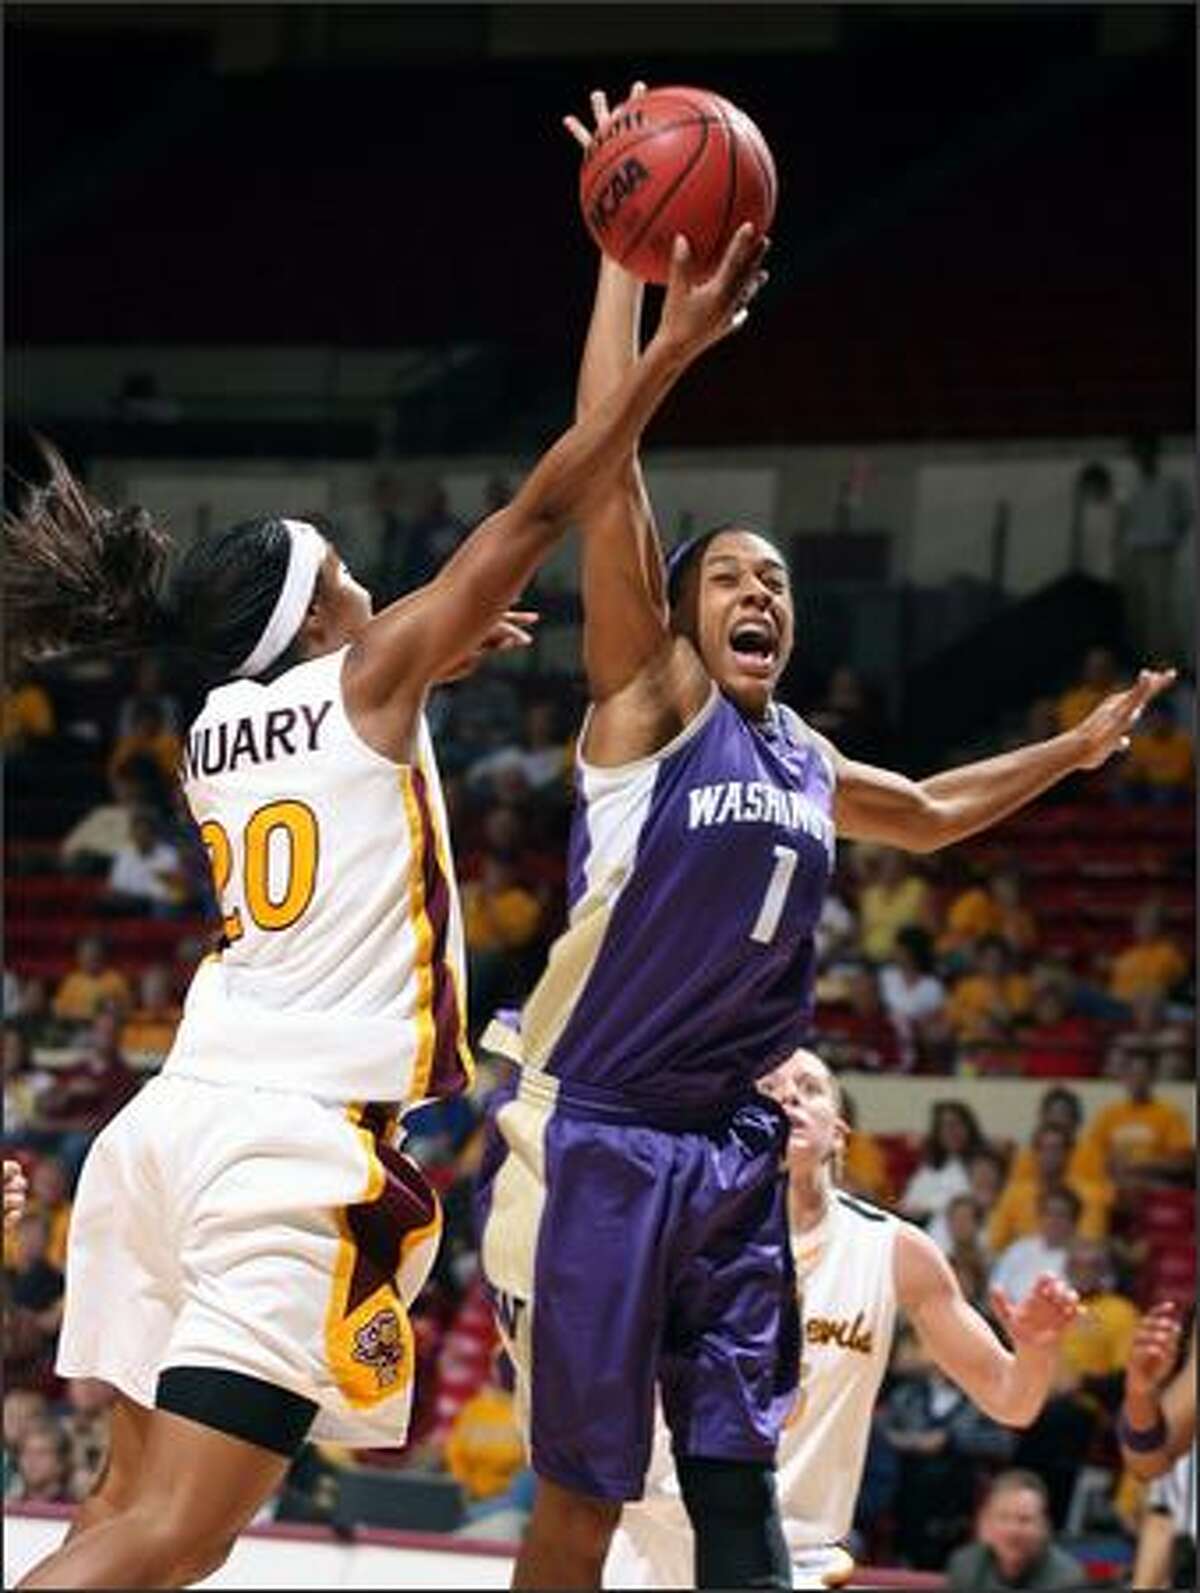 Washington's Jill Bell blocks a shot attempt by Arizona State's Briann January in the first half